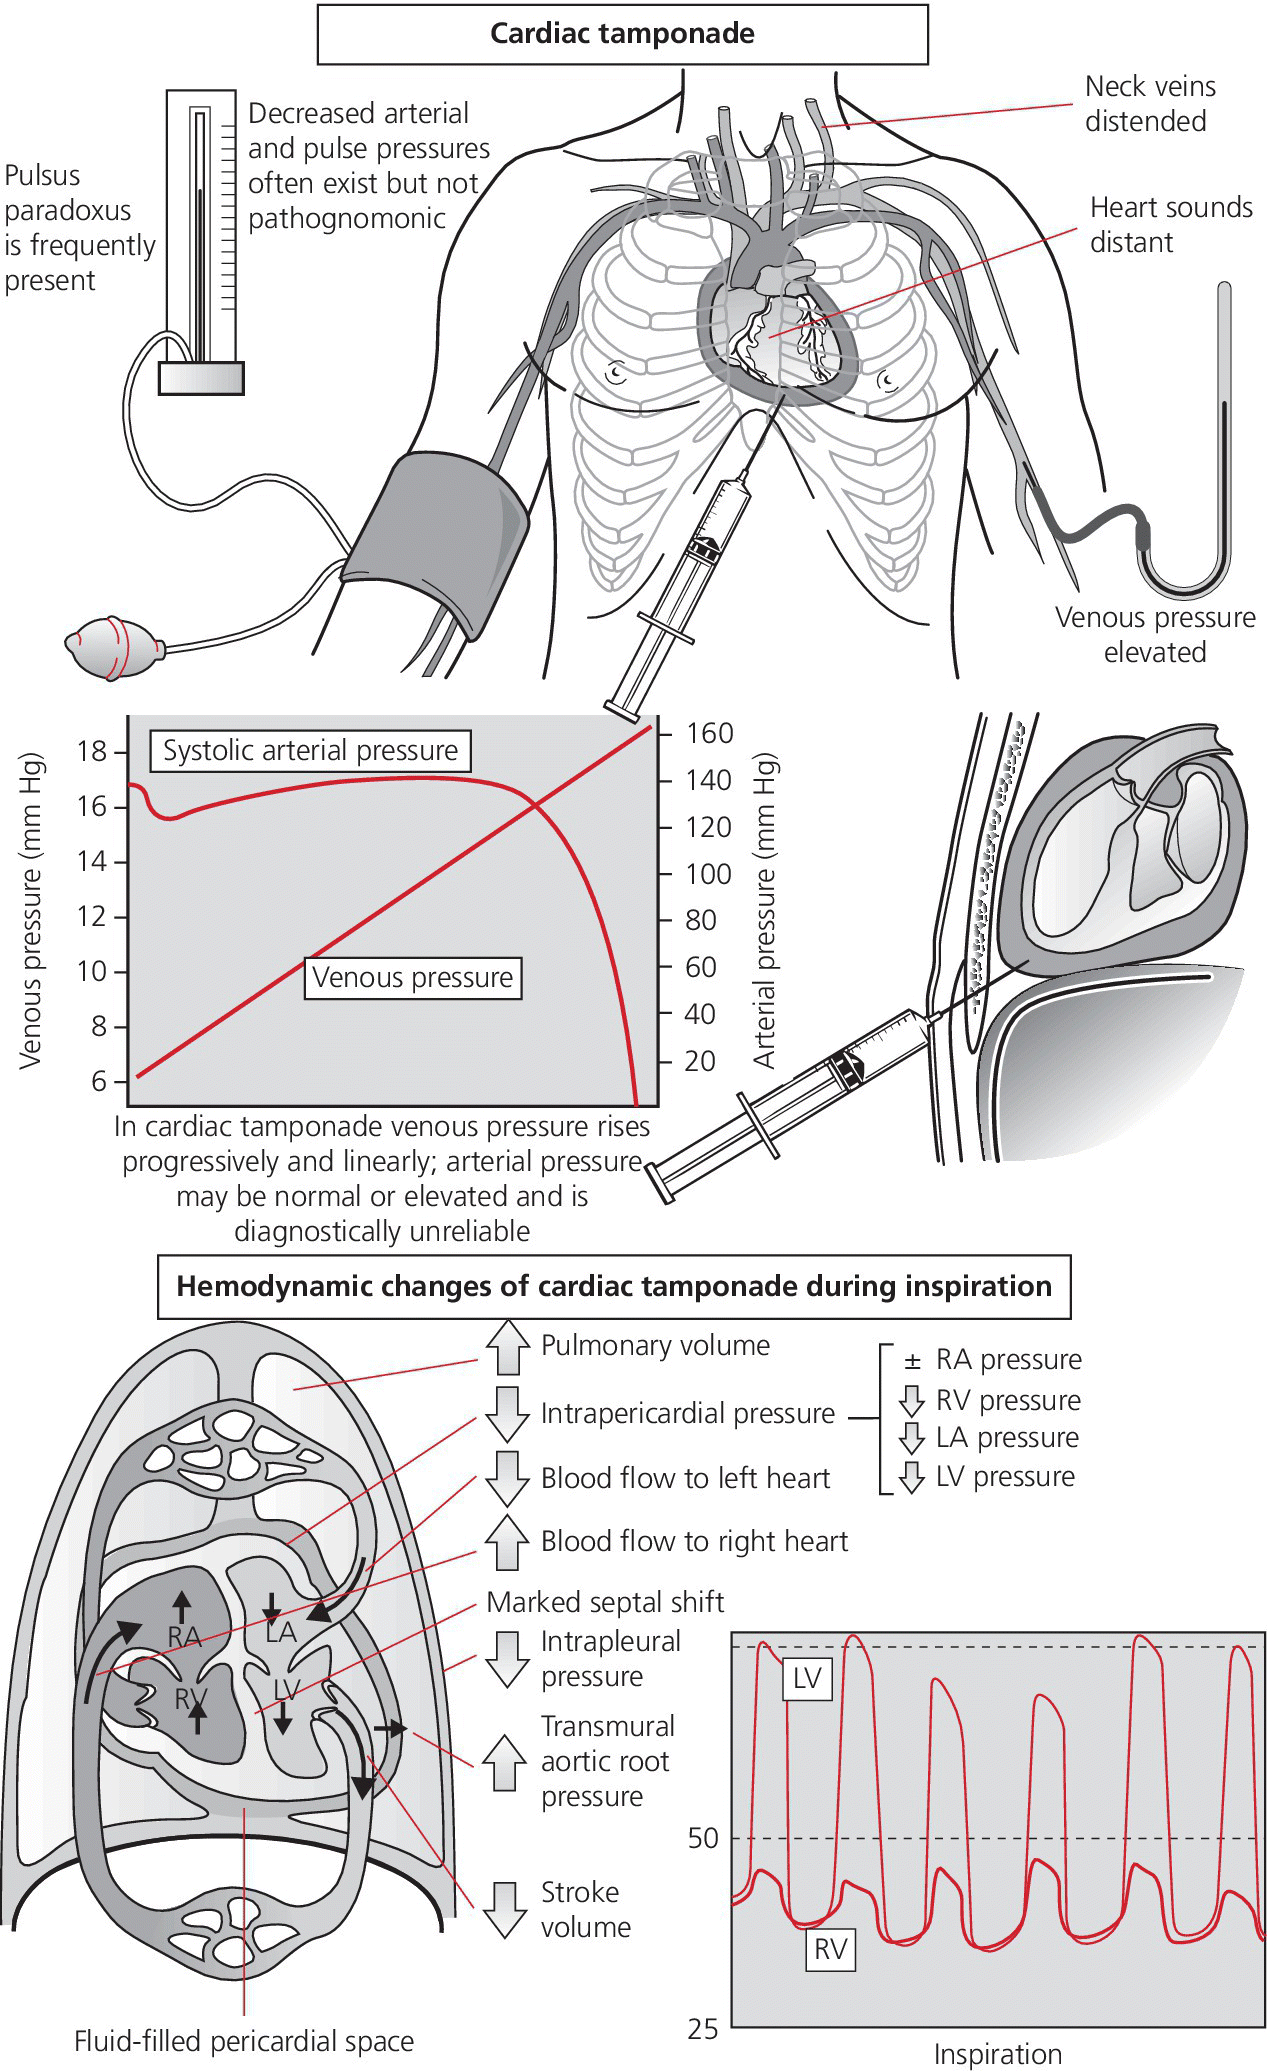 2 Illustrations of cardiac tamponade (top) and hemodynamic changes of cardiac tamponade during inspiration (bottom) with 2 graphs depicting systolic arterial pressure, venous pressure, LV, and RV.